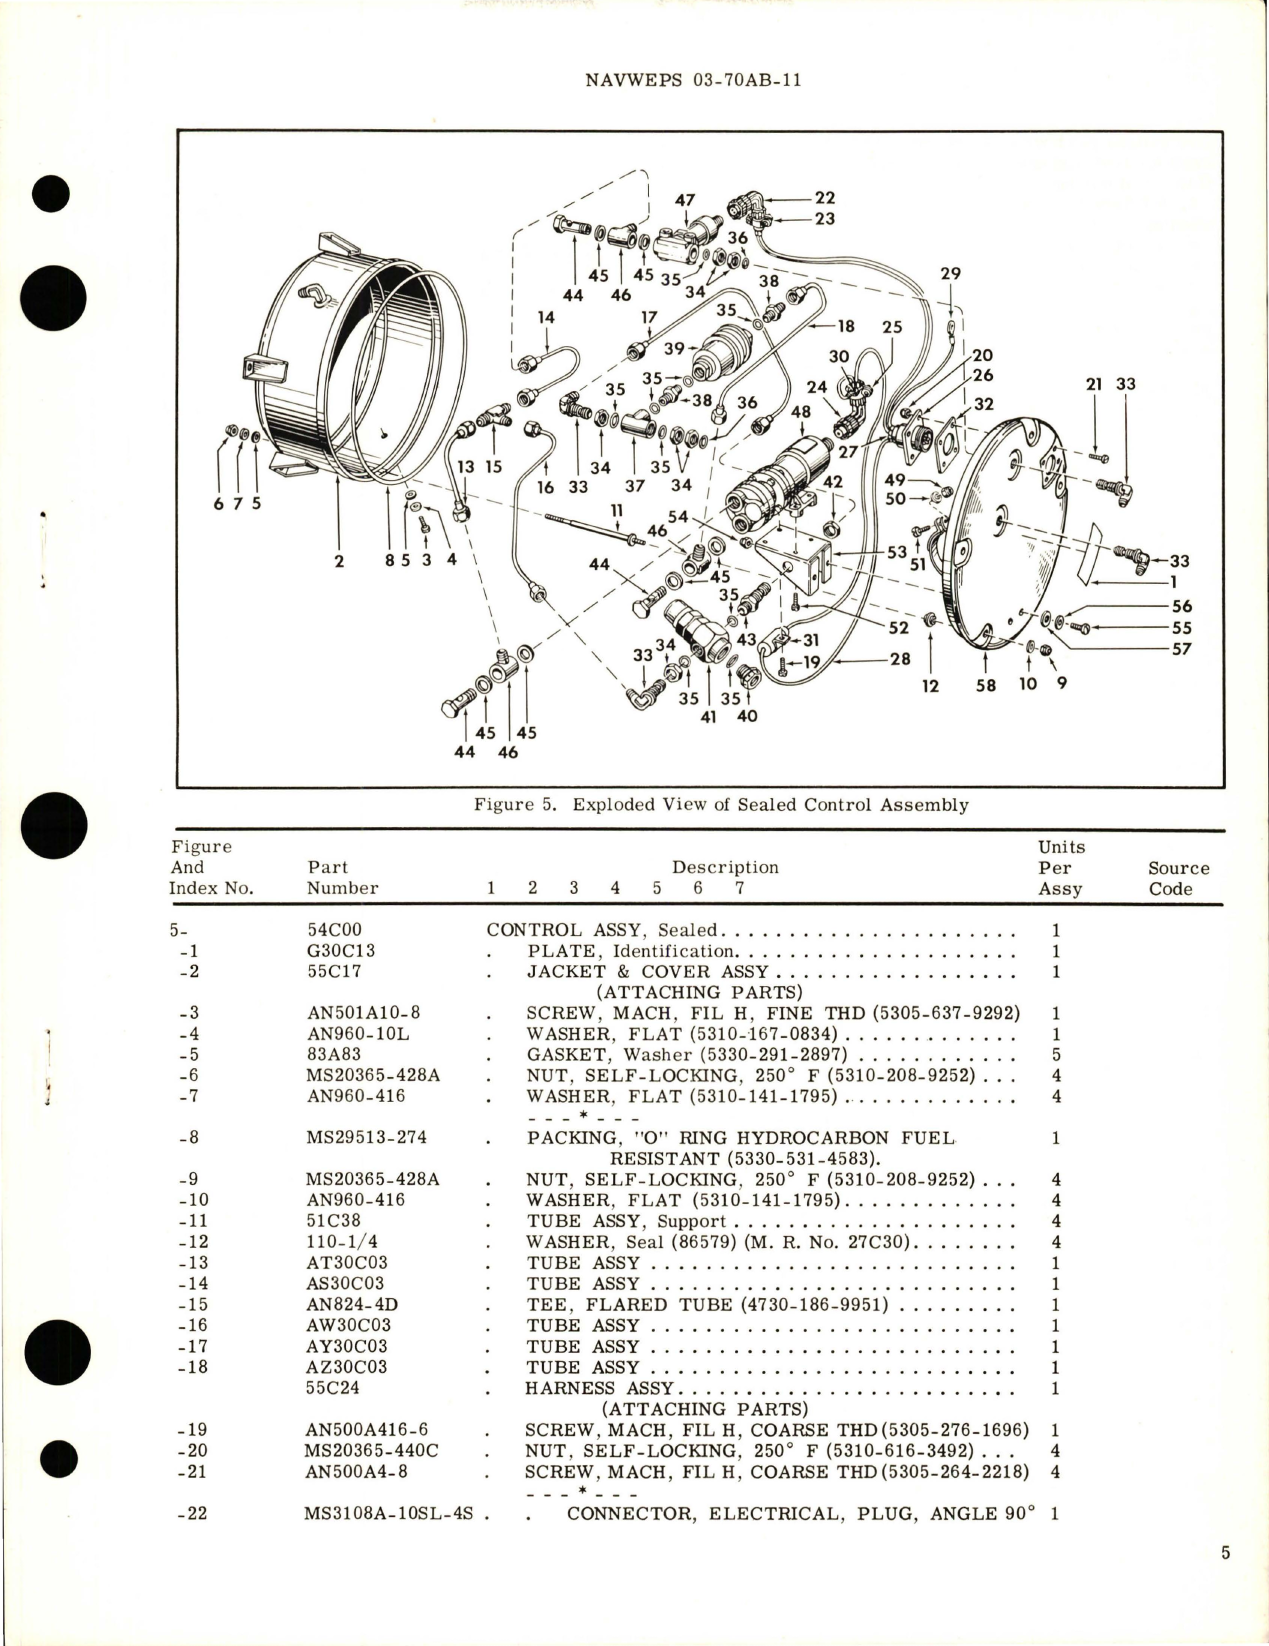 Sample page 5 from AirCorps Library document: Overhaul Instructions with Parts Breakdown for Sealed Control Assembly - Part 54C00